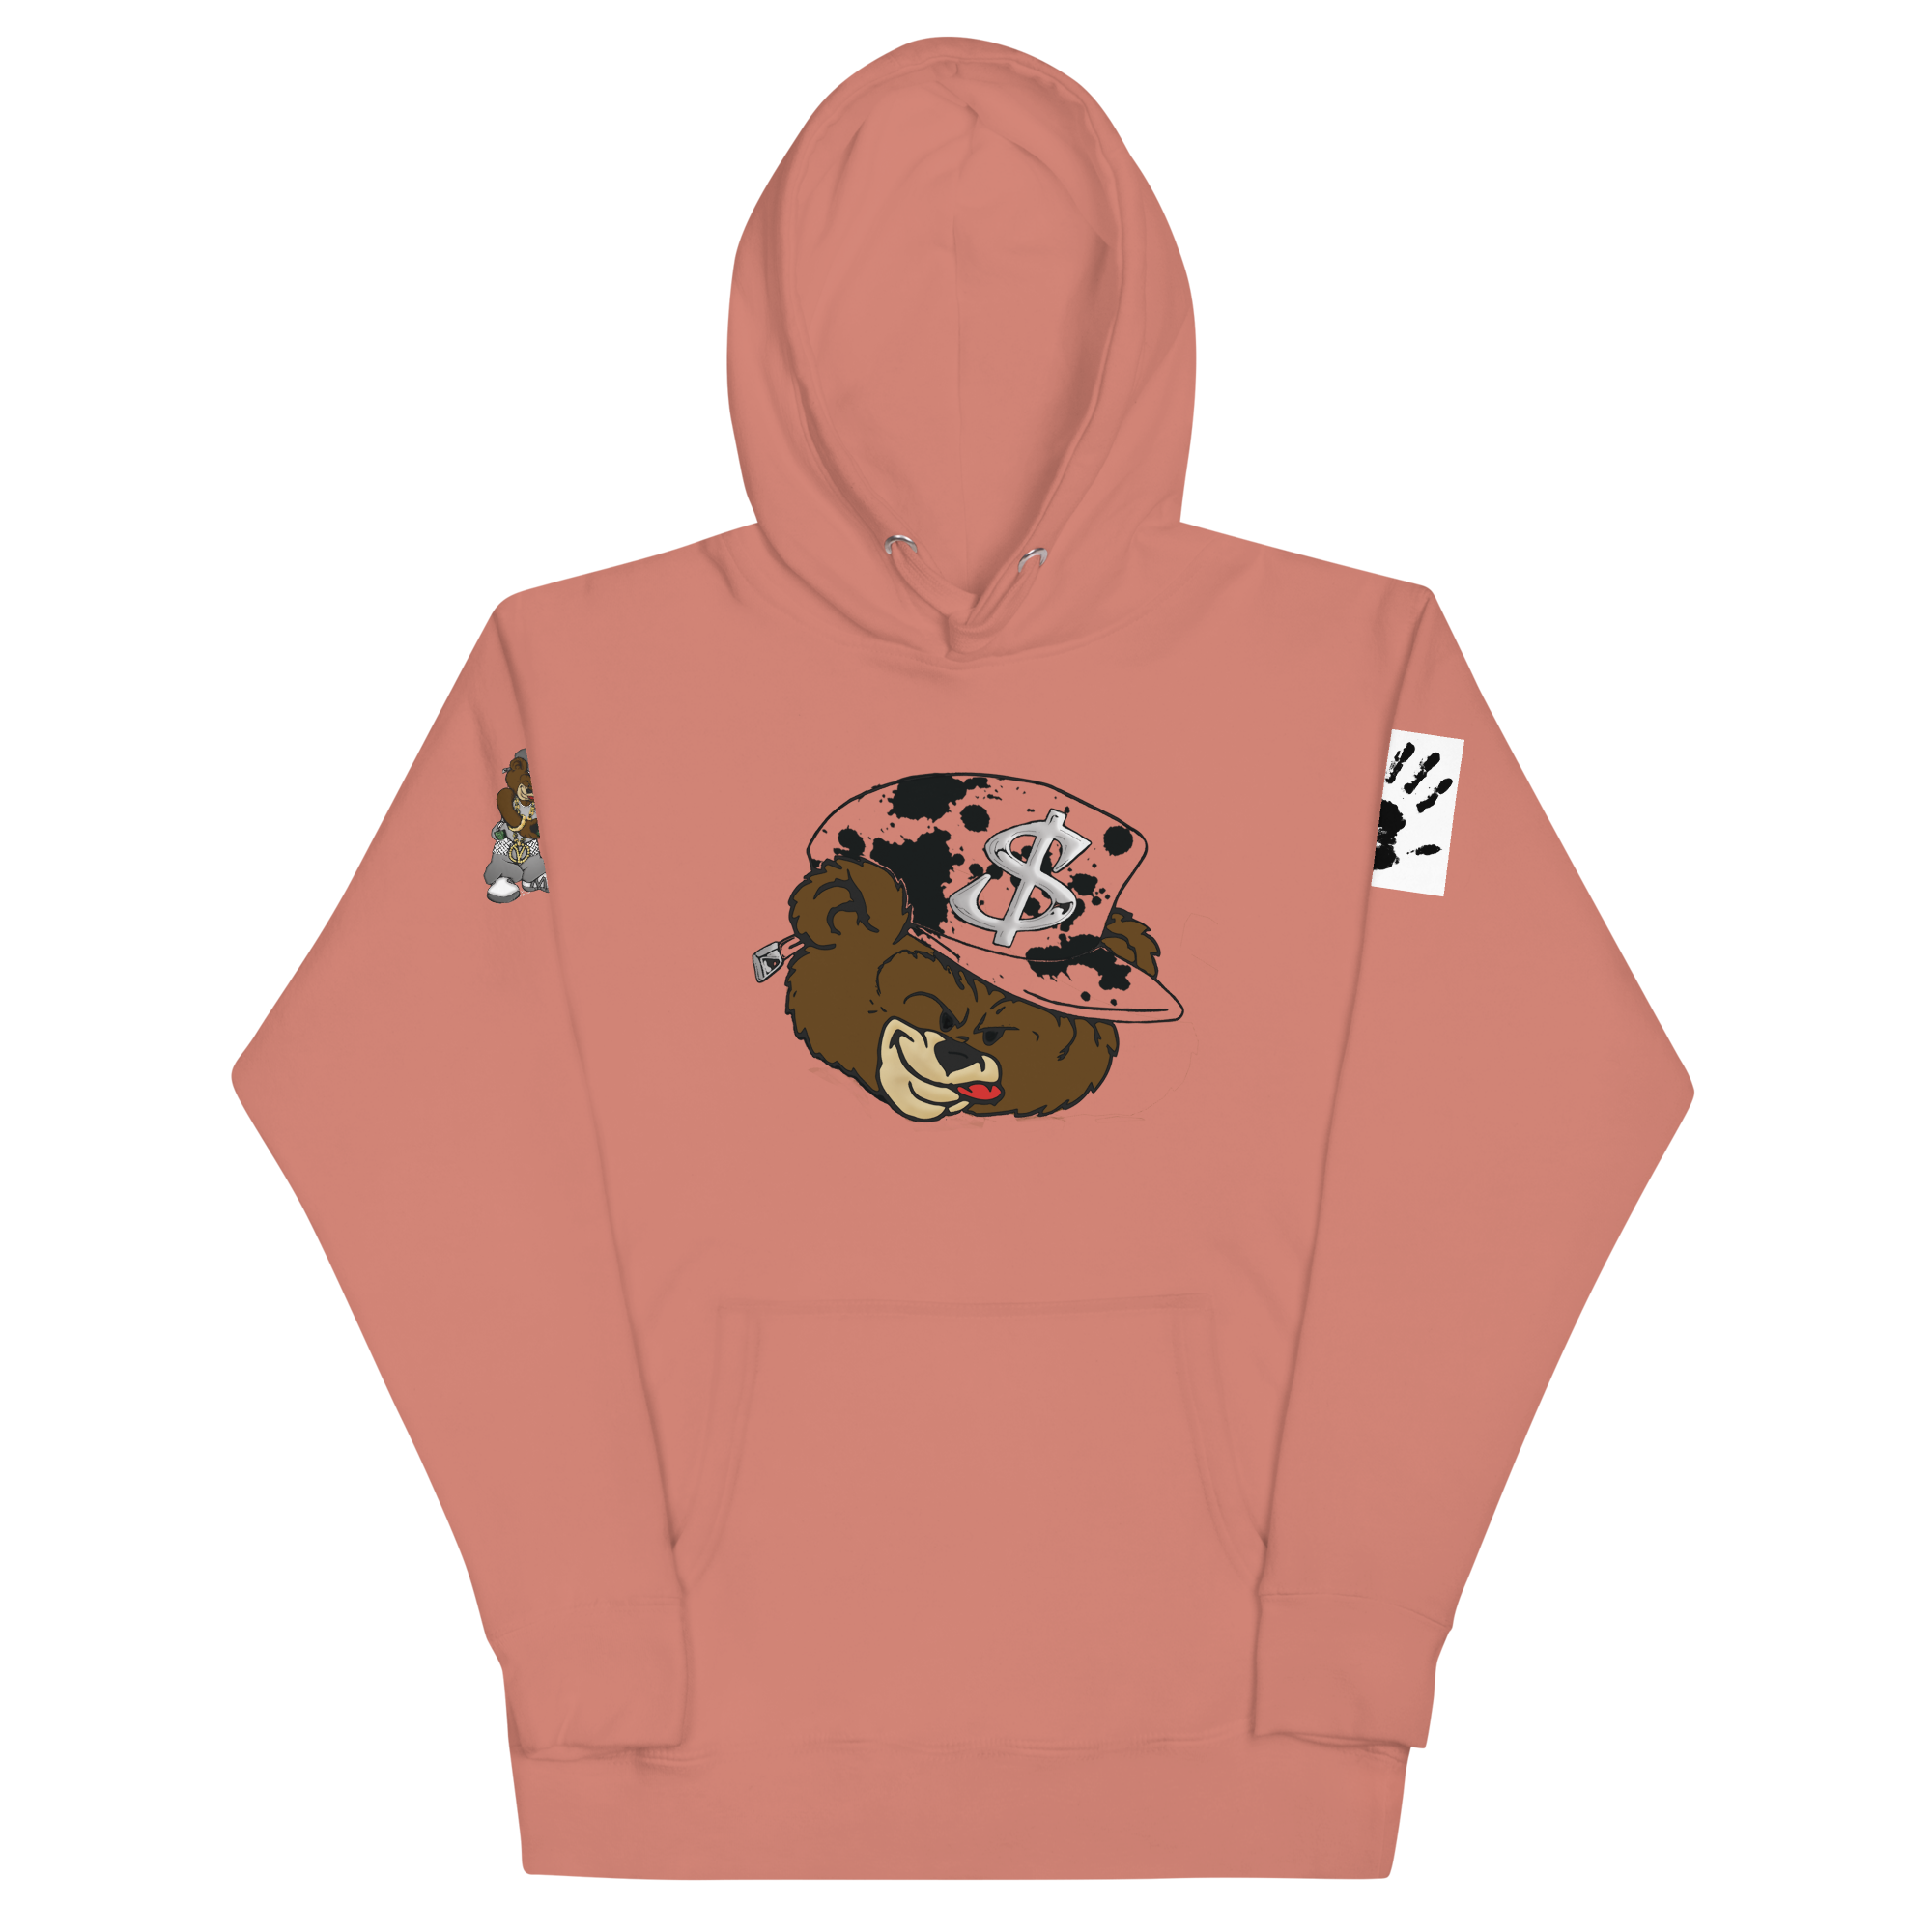 Chic Money Bear fitted hoodies